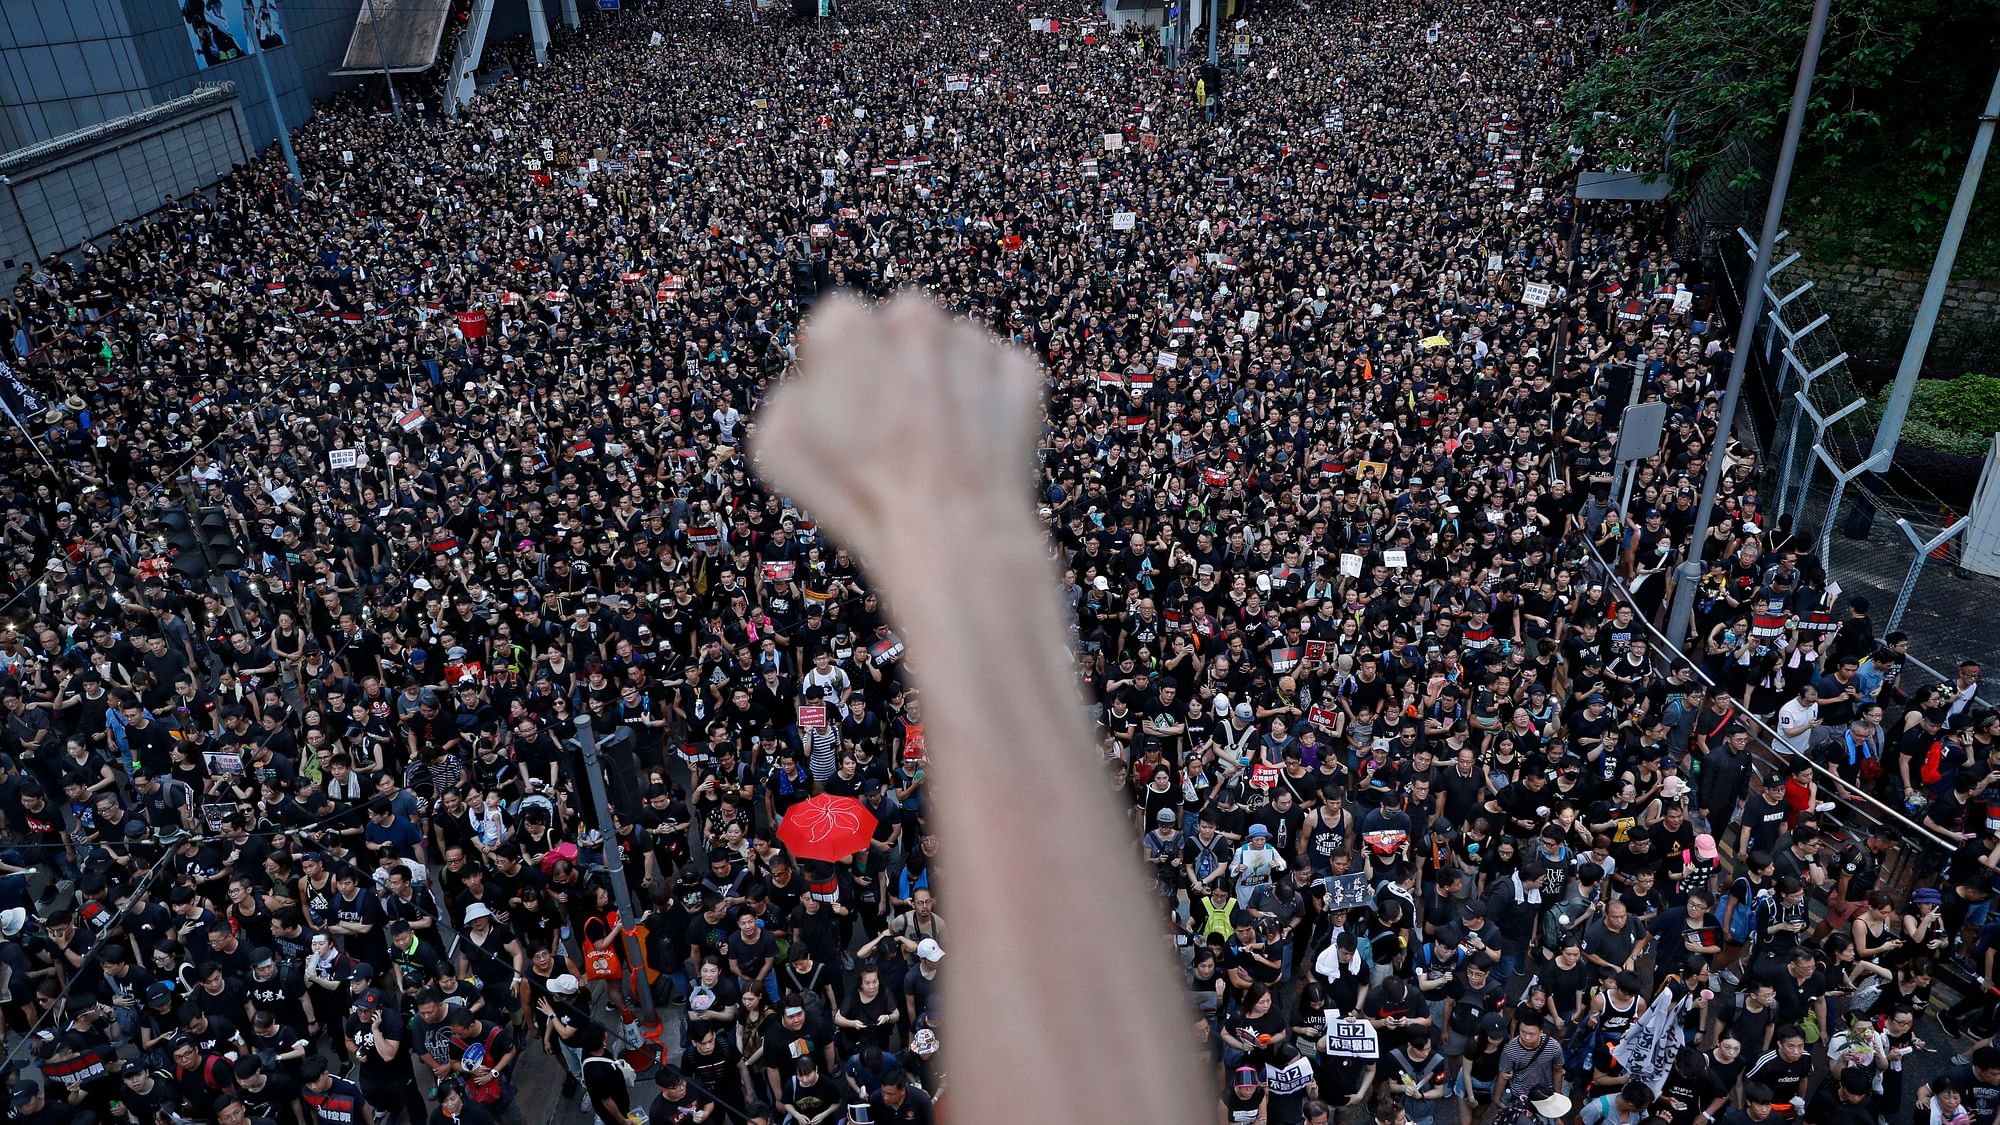 Protesters march on the streets against an extradition bill in Hong Kong on Sunday, 16 June 2019. Hong Kong residents were gathering Sunday for another massive protest over an unpopular extradition bill